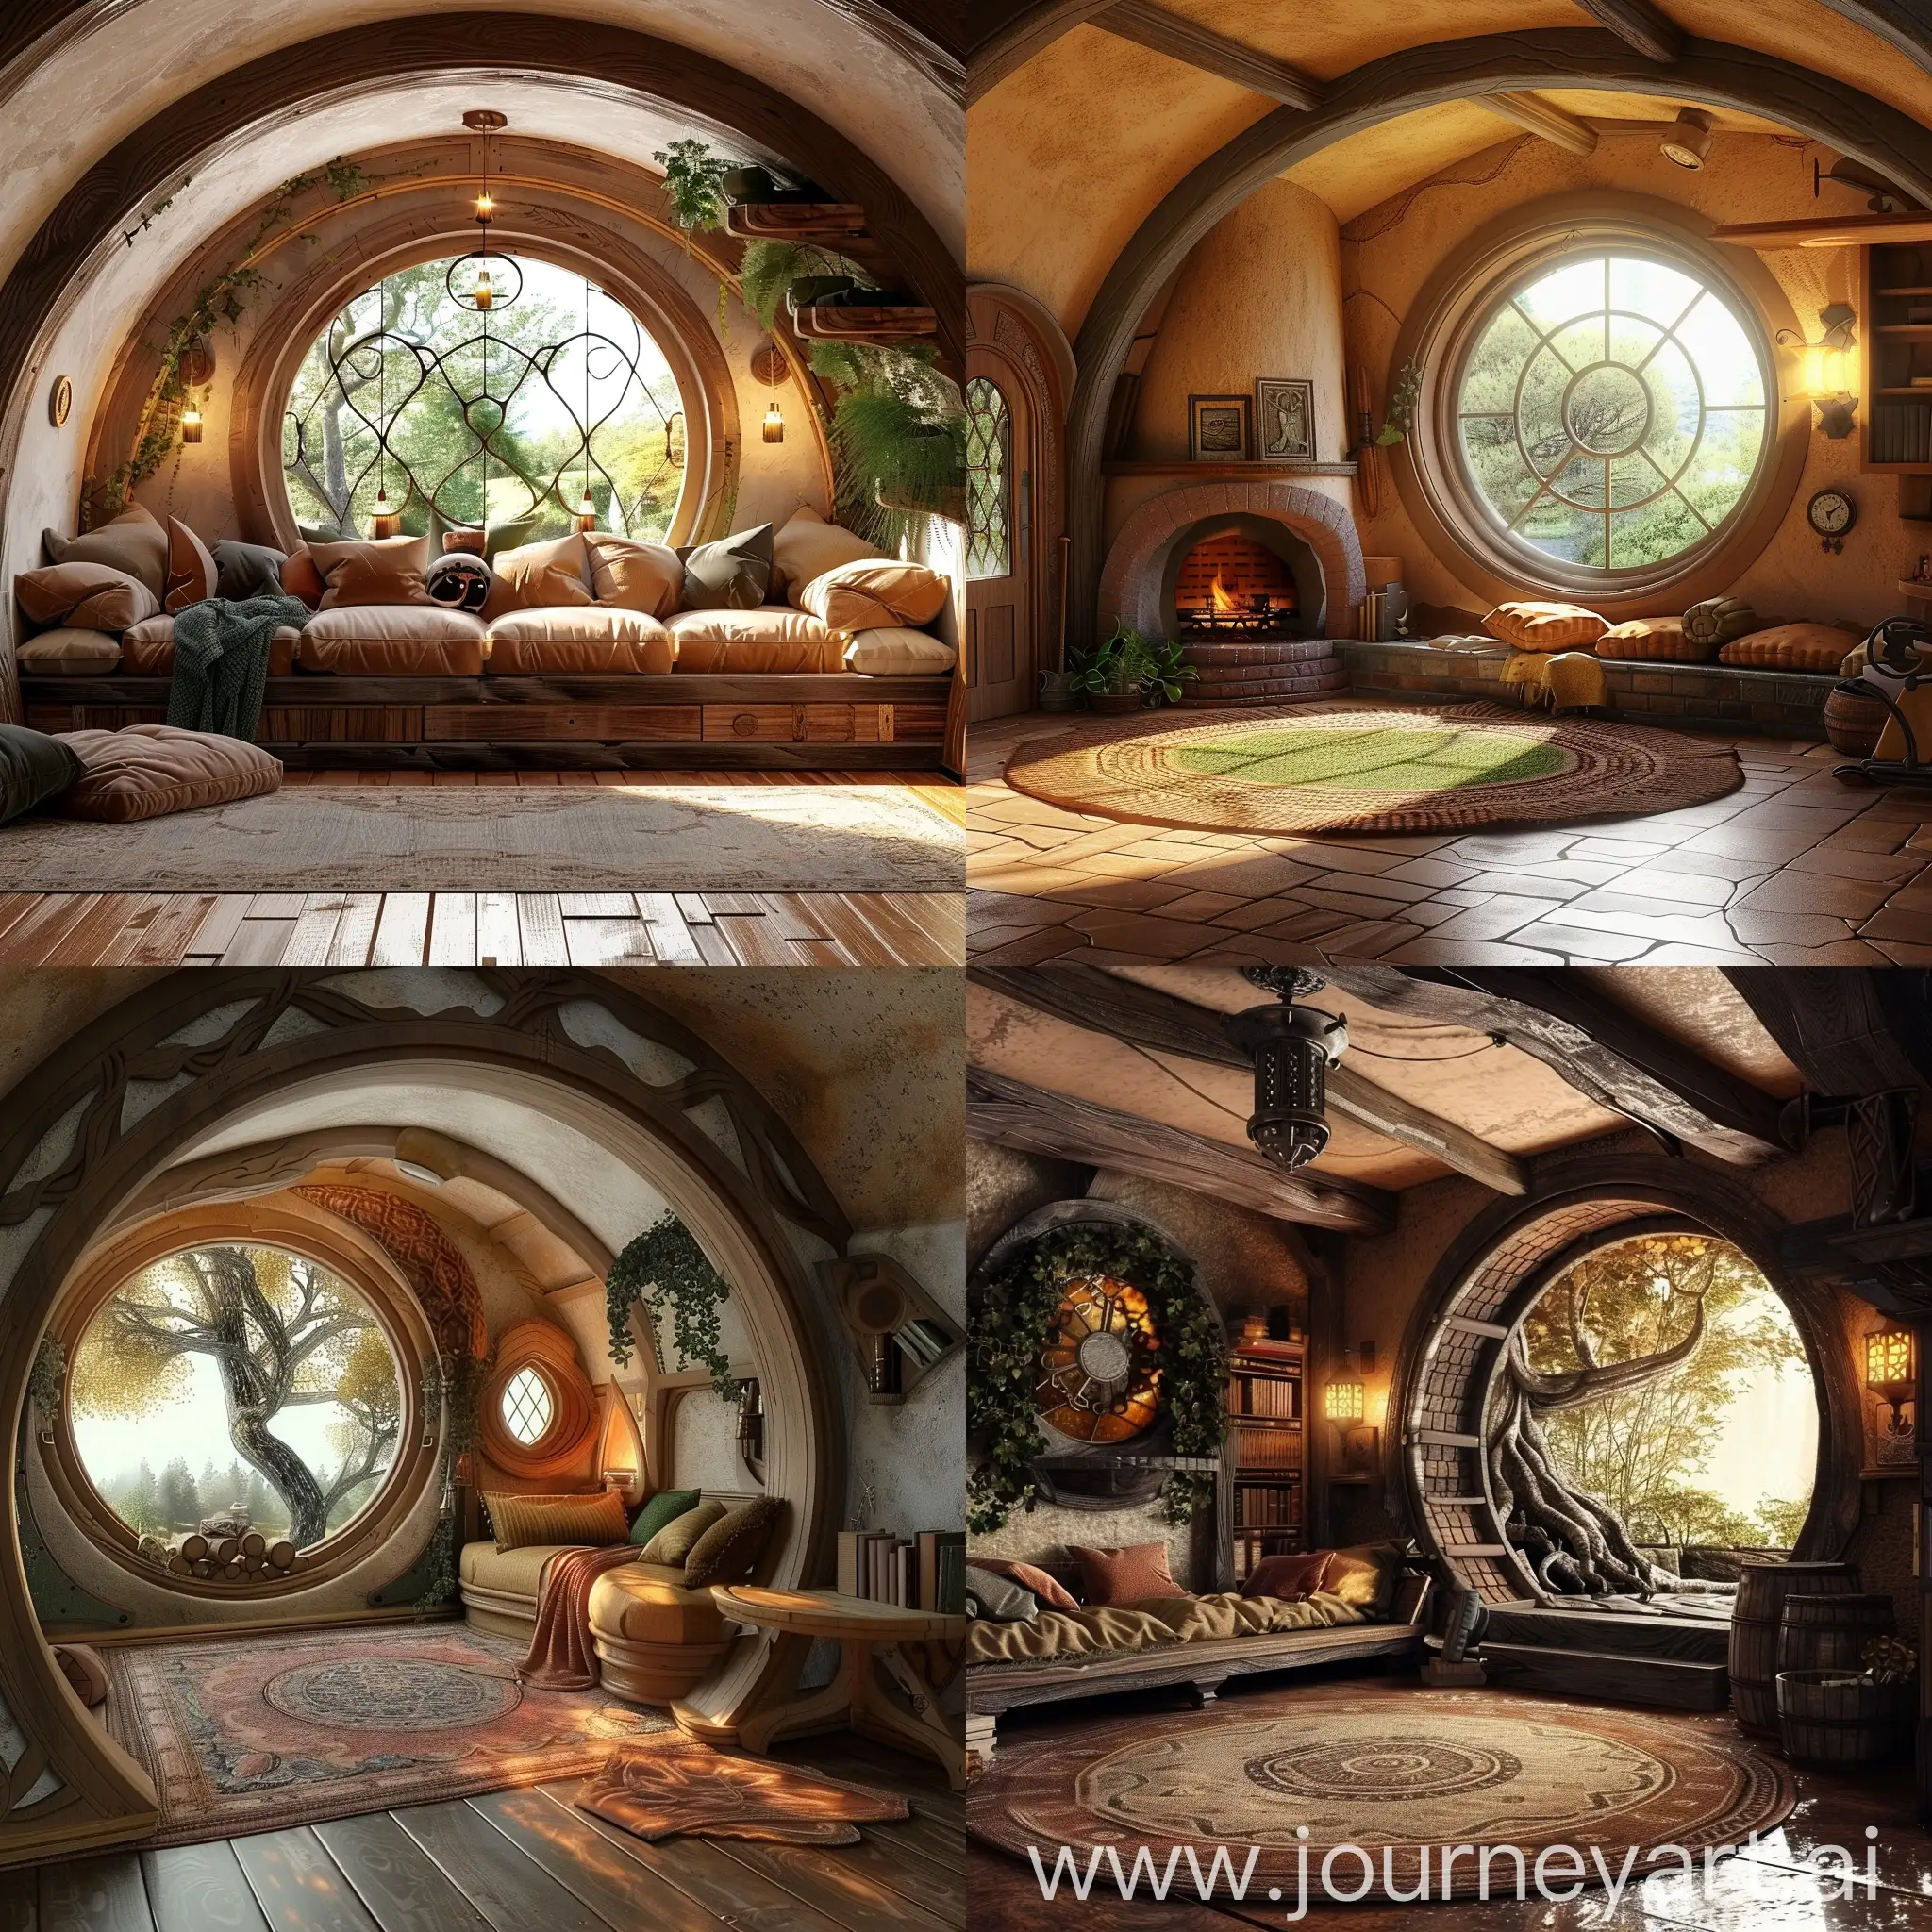 Middleearth-Style-Living-Room-in-Golden-Hour-Ambiance